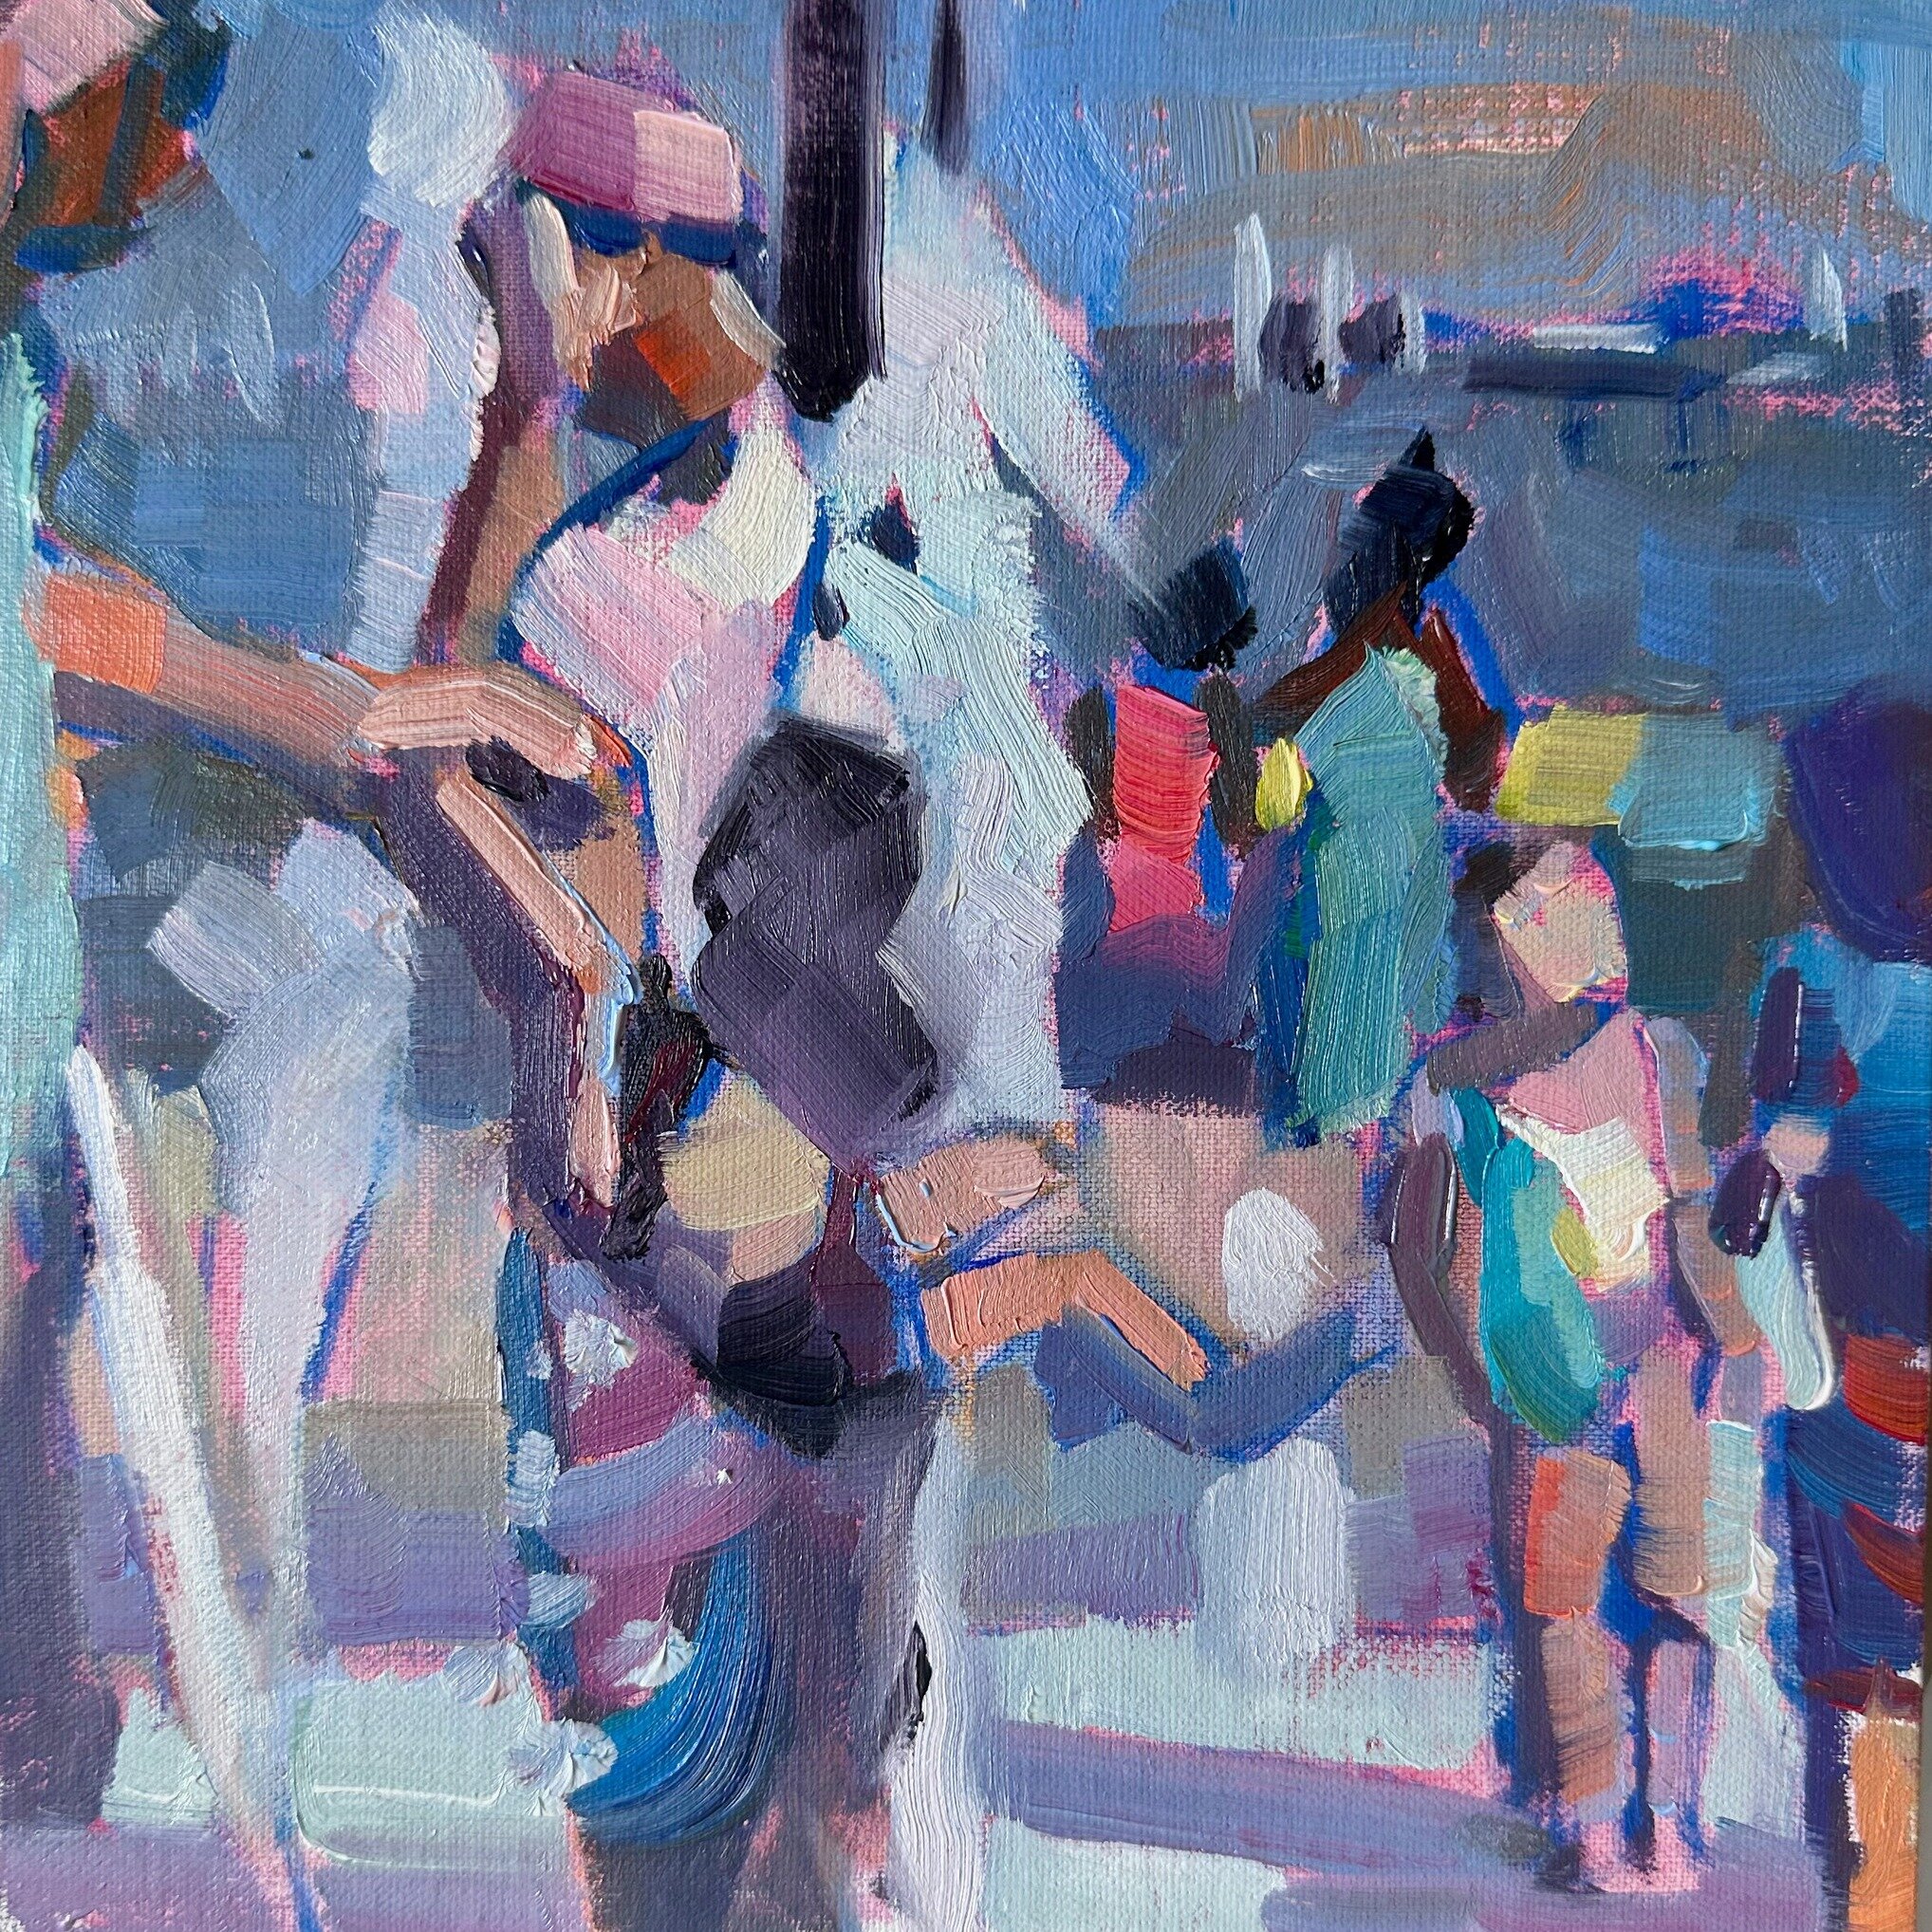 While I&rsquo;m not ready to say goodbye to this season (hello, scorching Texas summer) &ndash; it was fun imagining people gathering on a splash pad on a warm day. Swipe for the evolution of this small color study. Thinking about scaling up to a lar